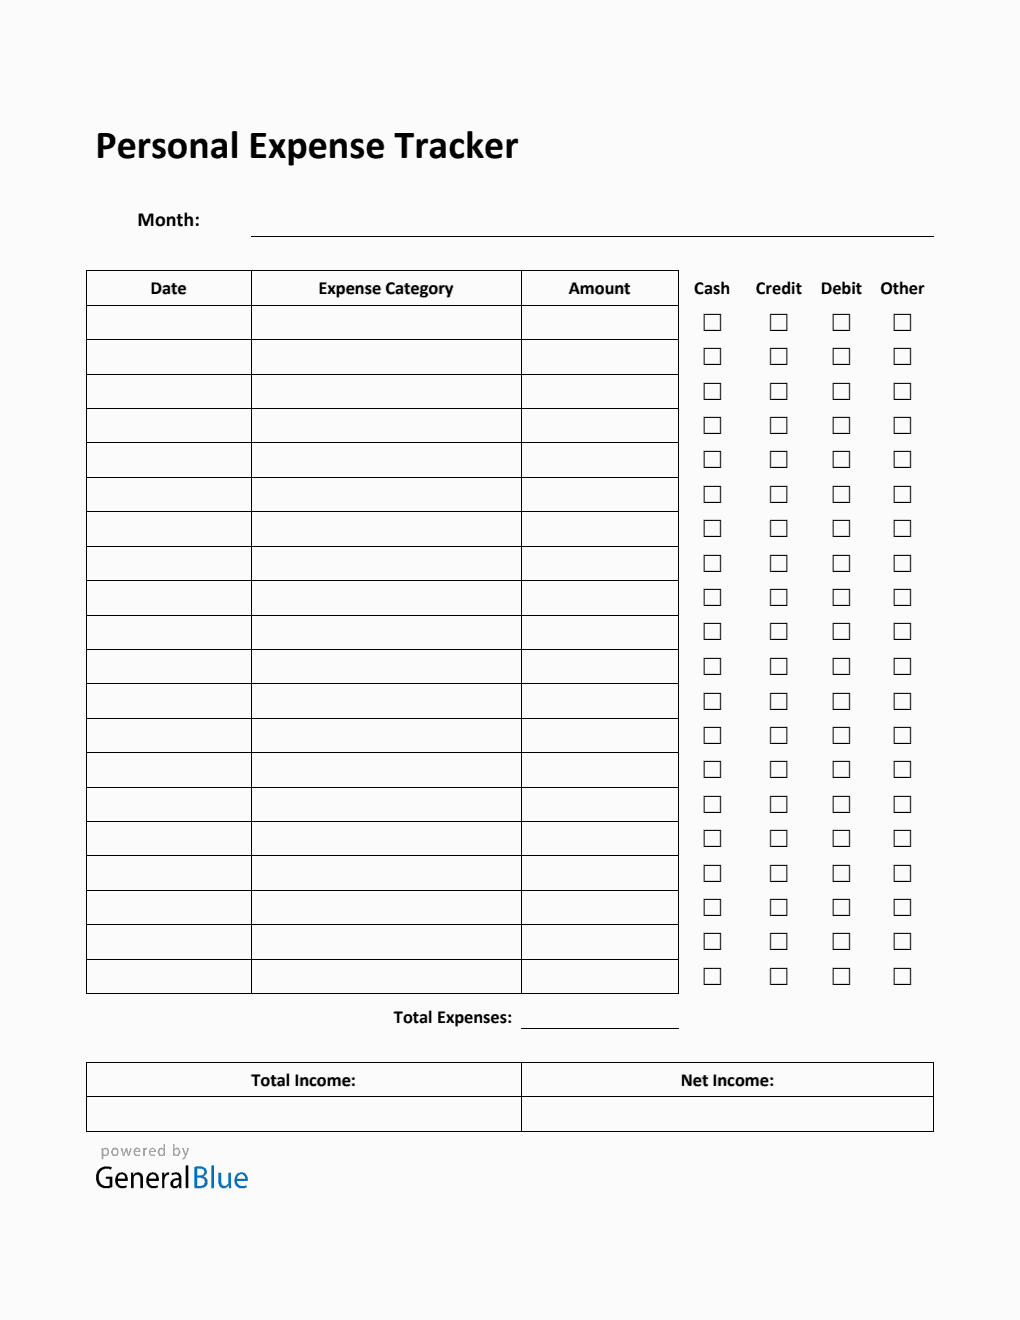 Personal Expense Tracker in Word (Striped)